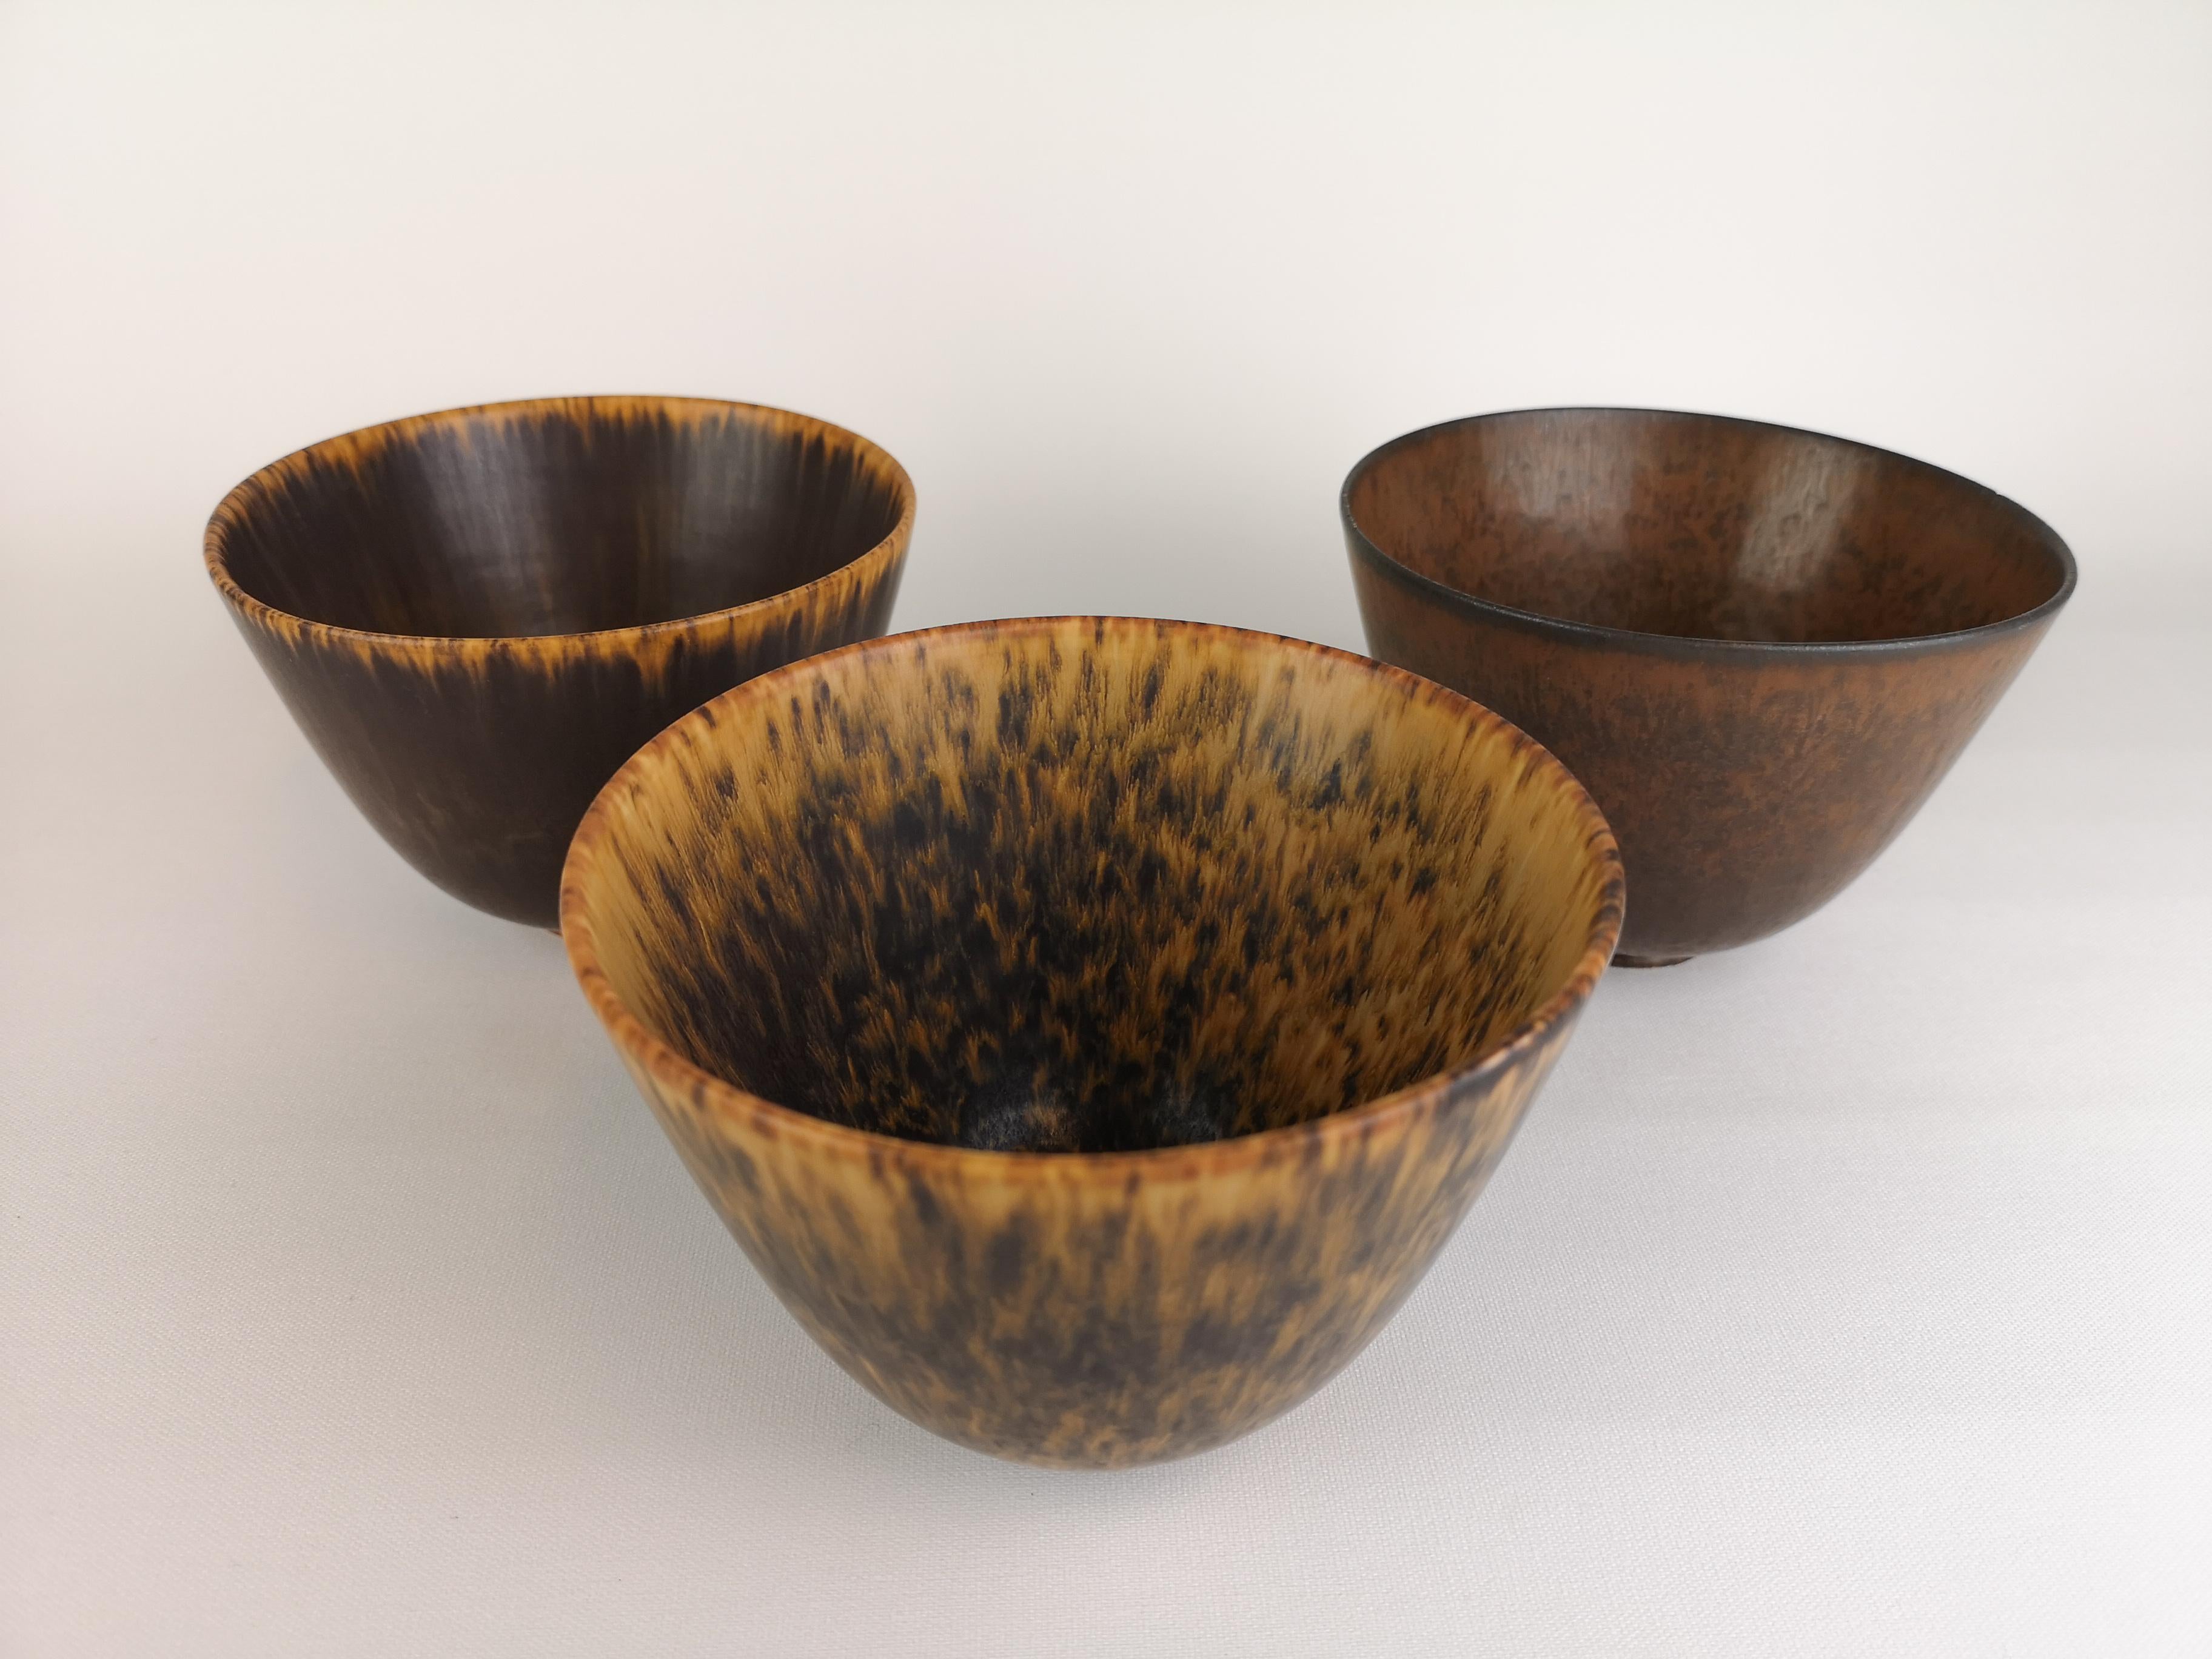 Three wonderful bowls from Rörstrand and maker or designer Gunnar Nylund. Made in Sweden in the midcentury. Beautiful glazed bowls in good condition.

 